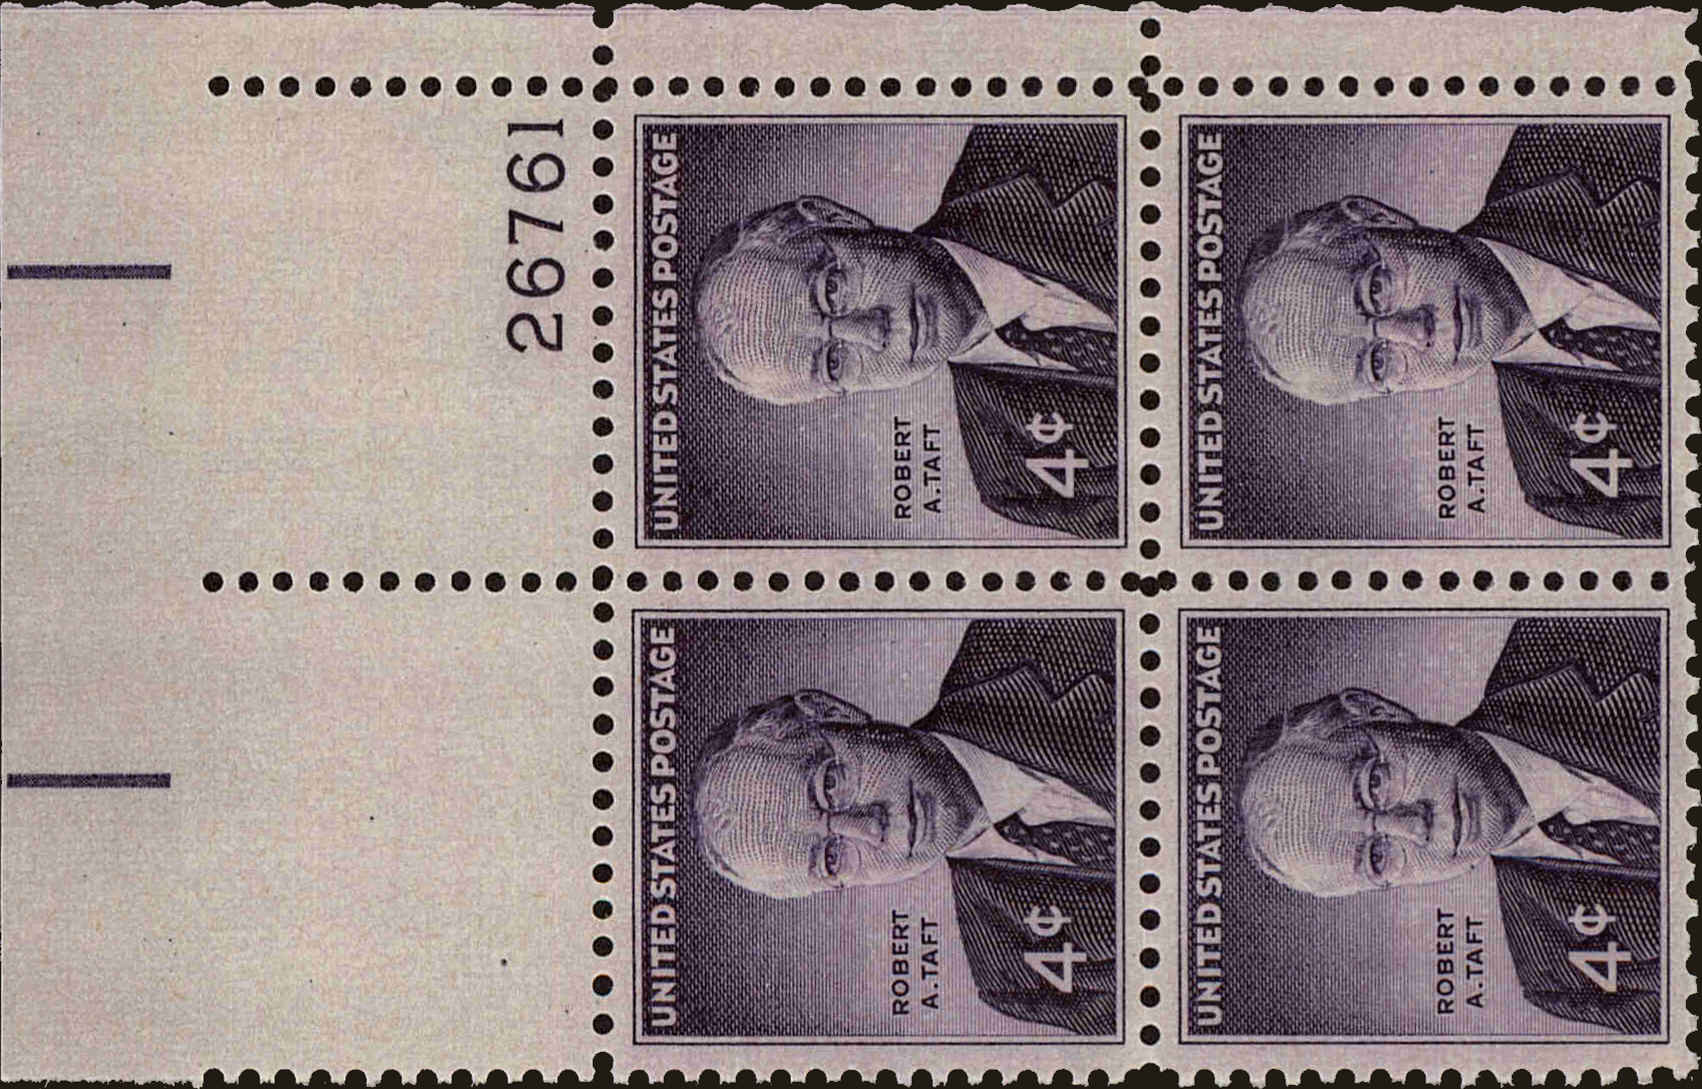 Front view of United States 1161 collectors stamp